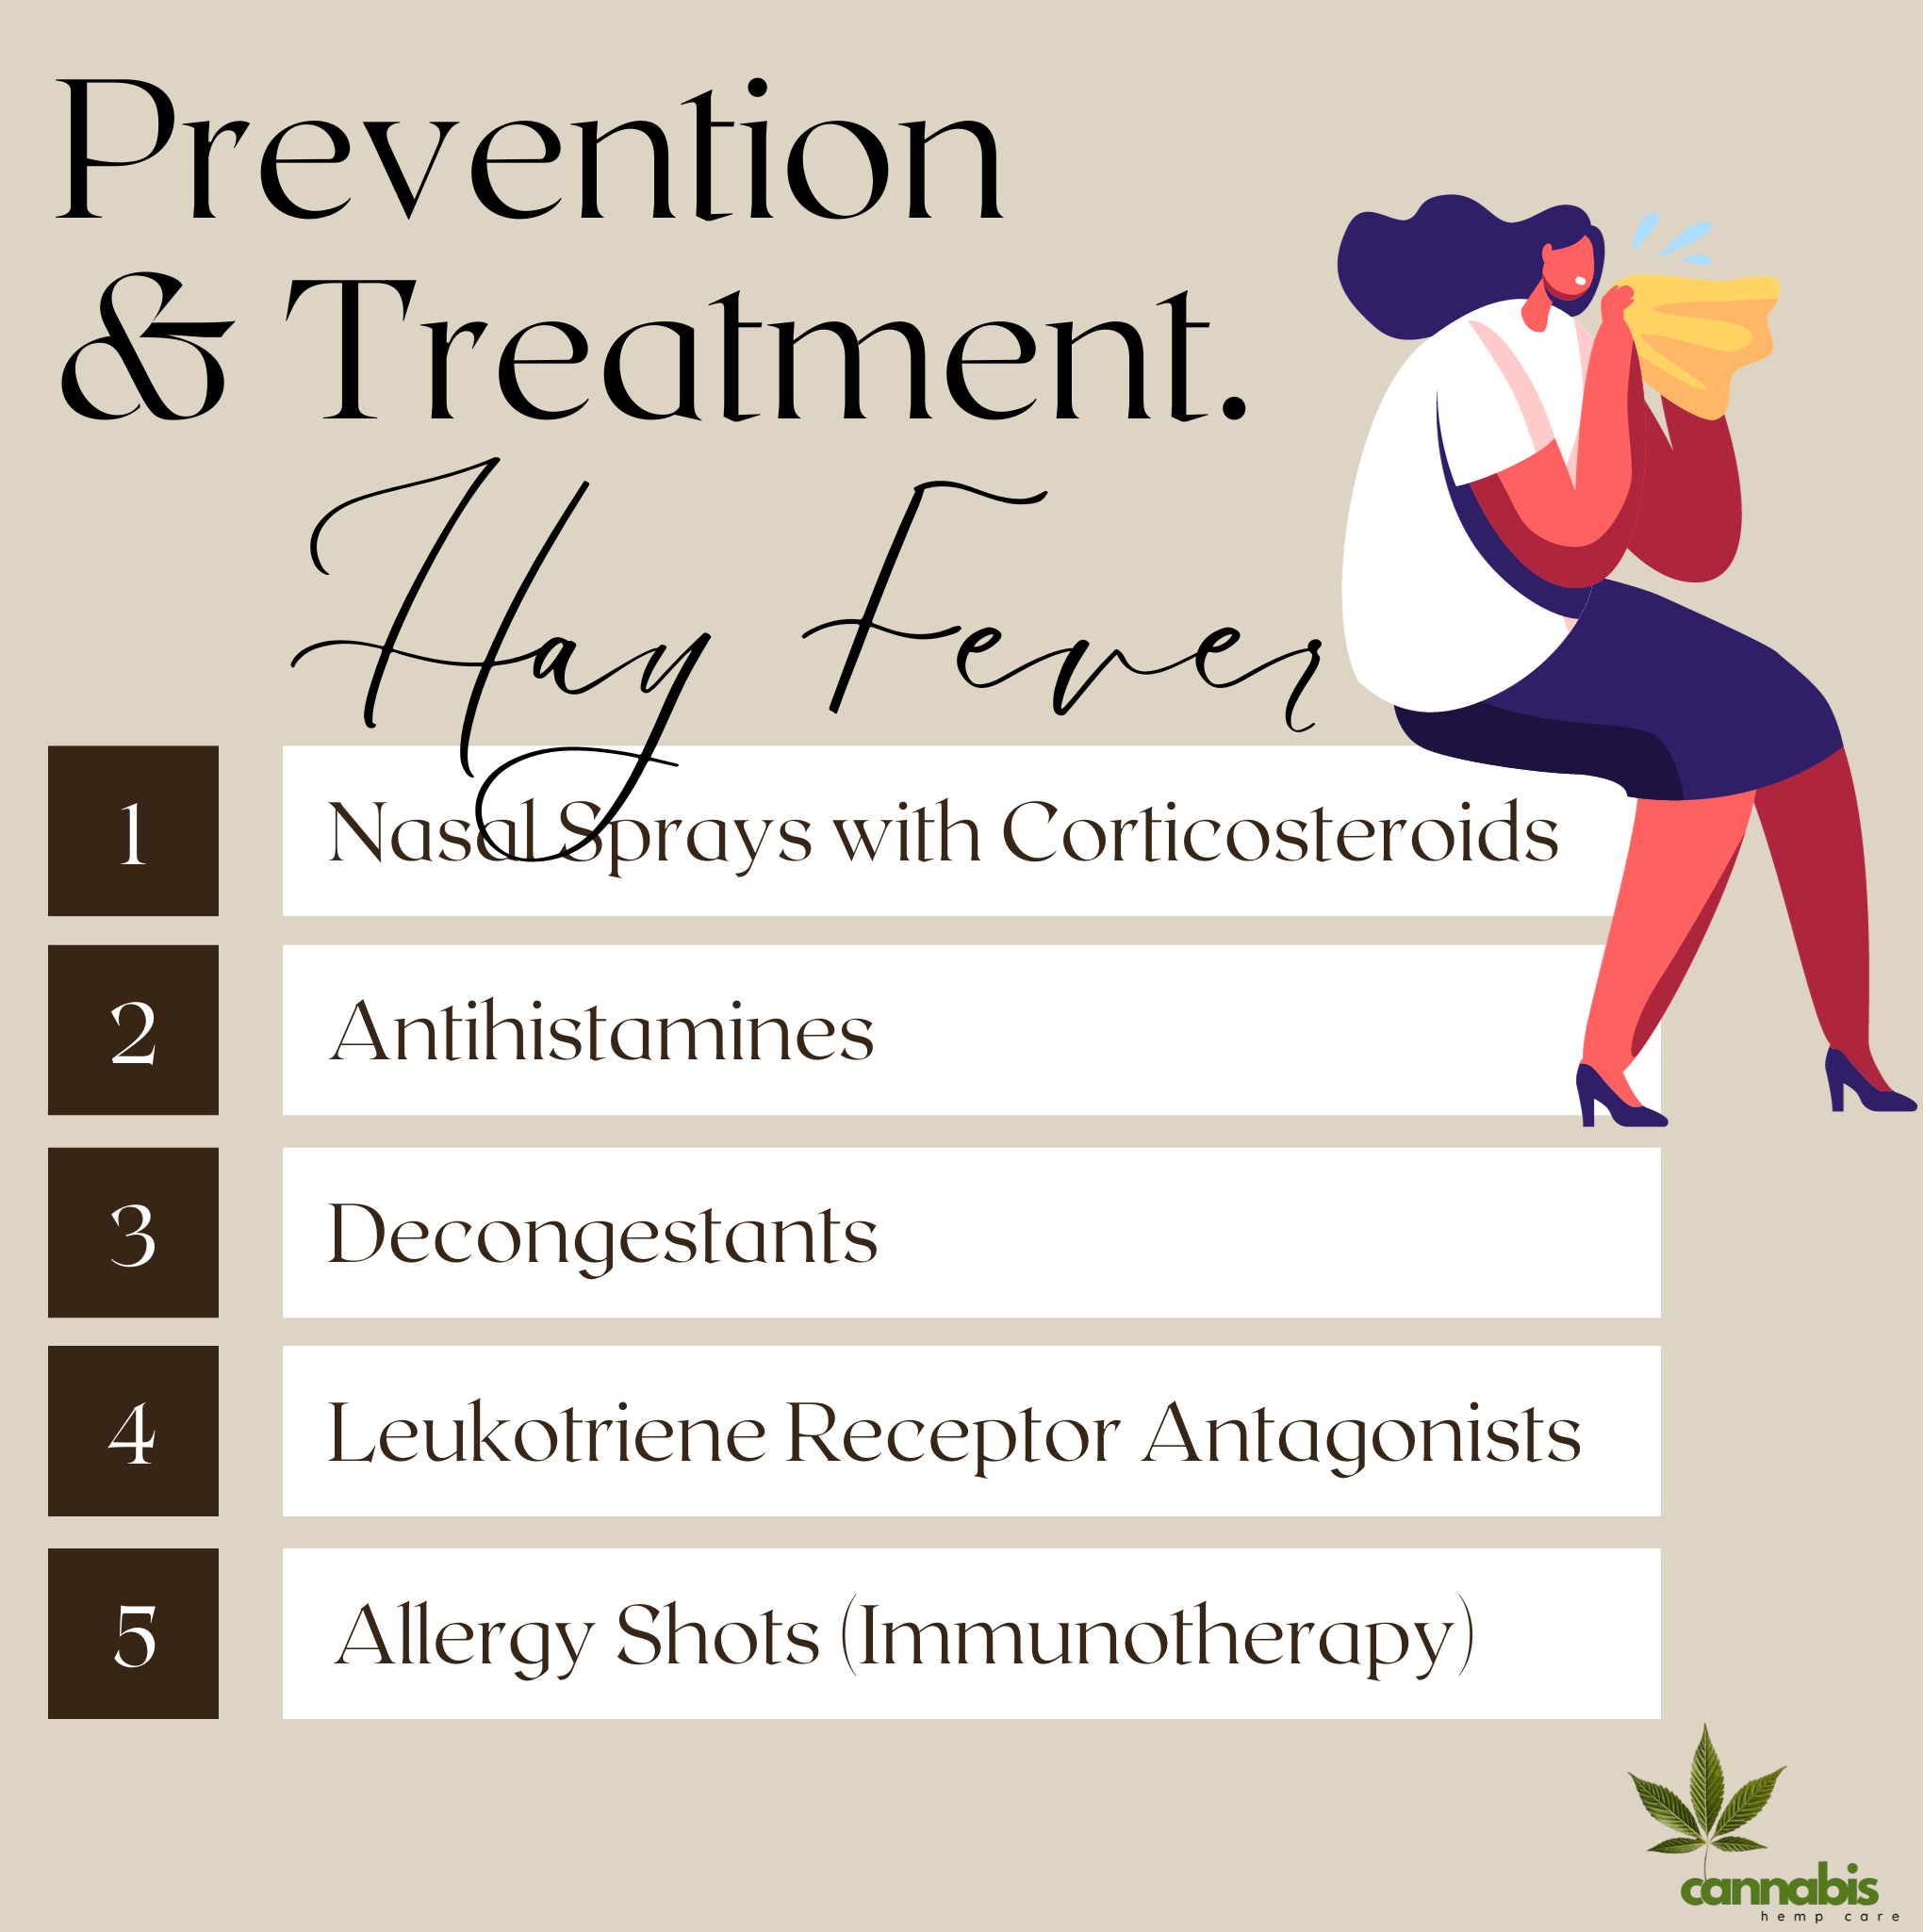 Prevention and Treatment of Hay Fever